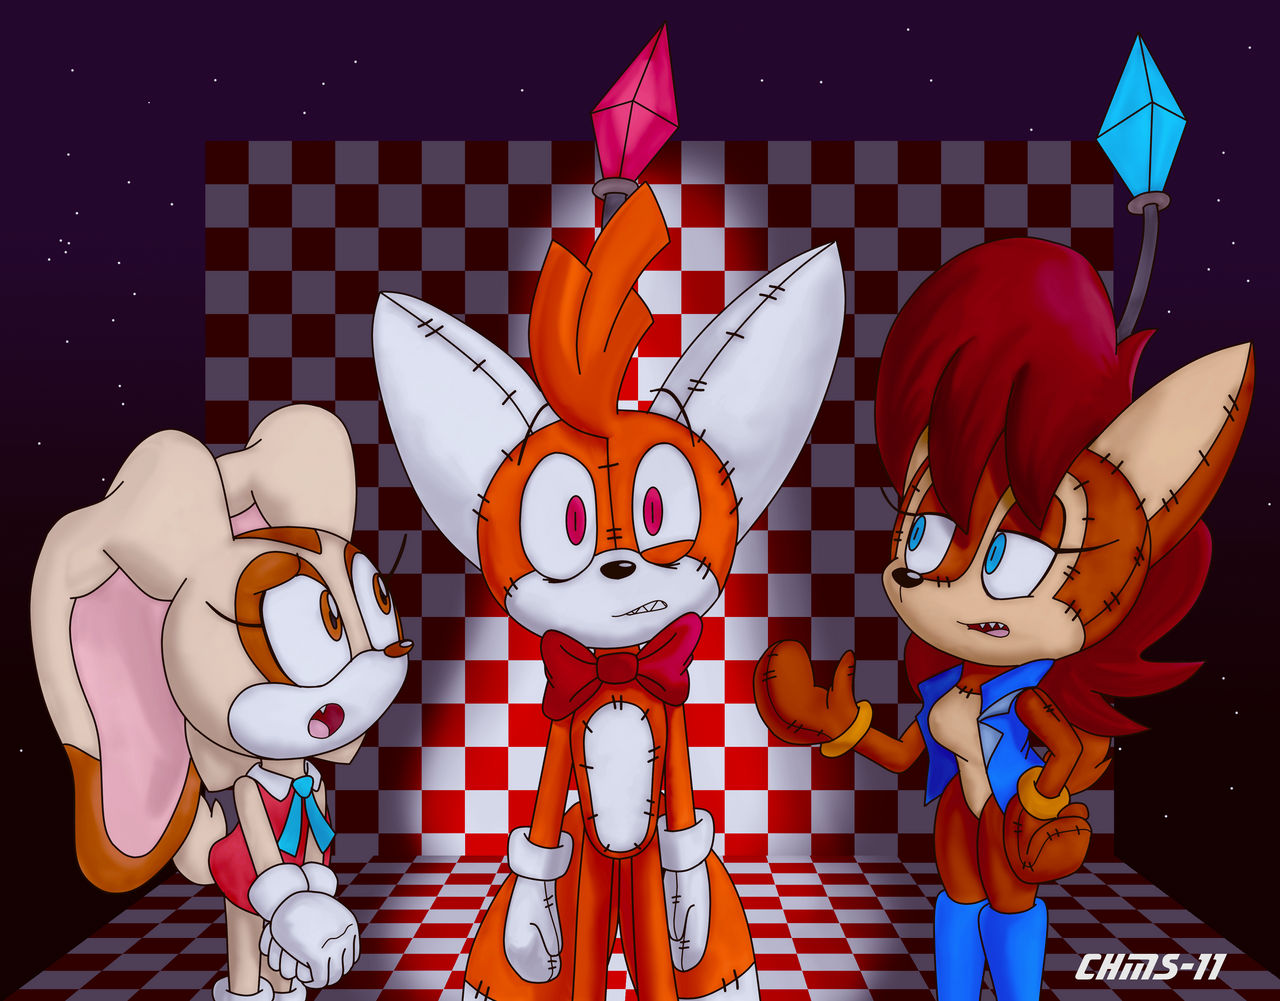 Sonic got a Tails Doll by Snowpaw1 - Fanart Central